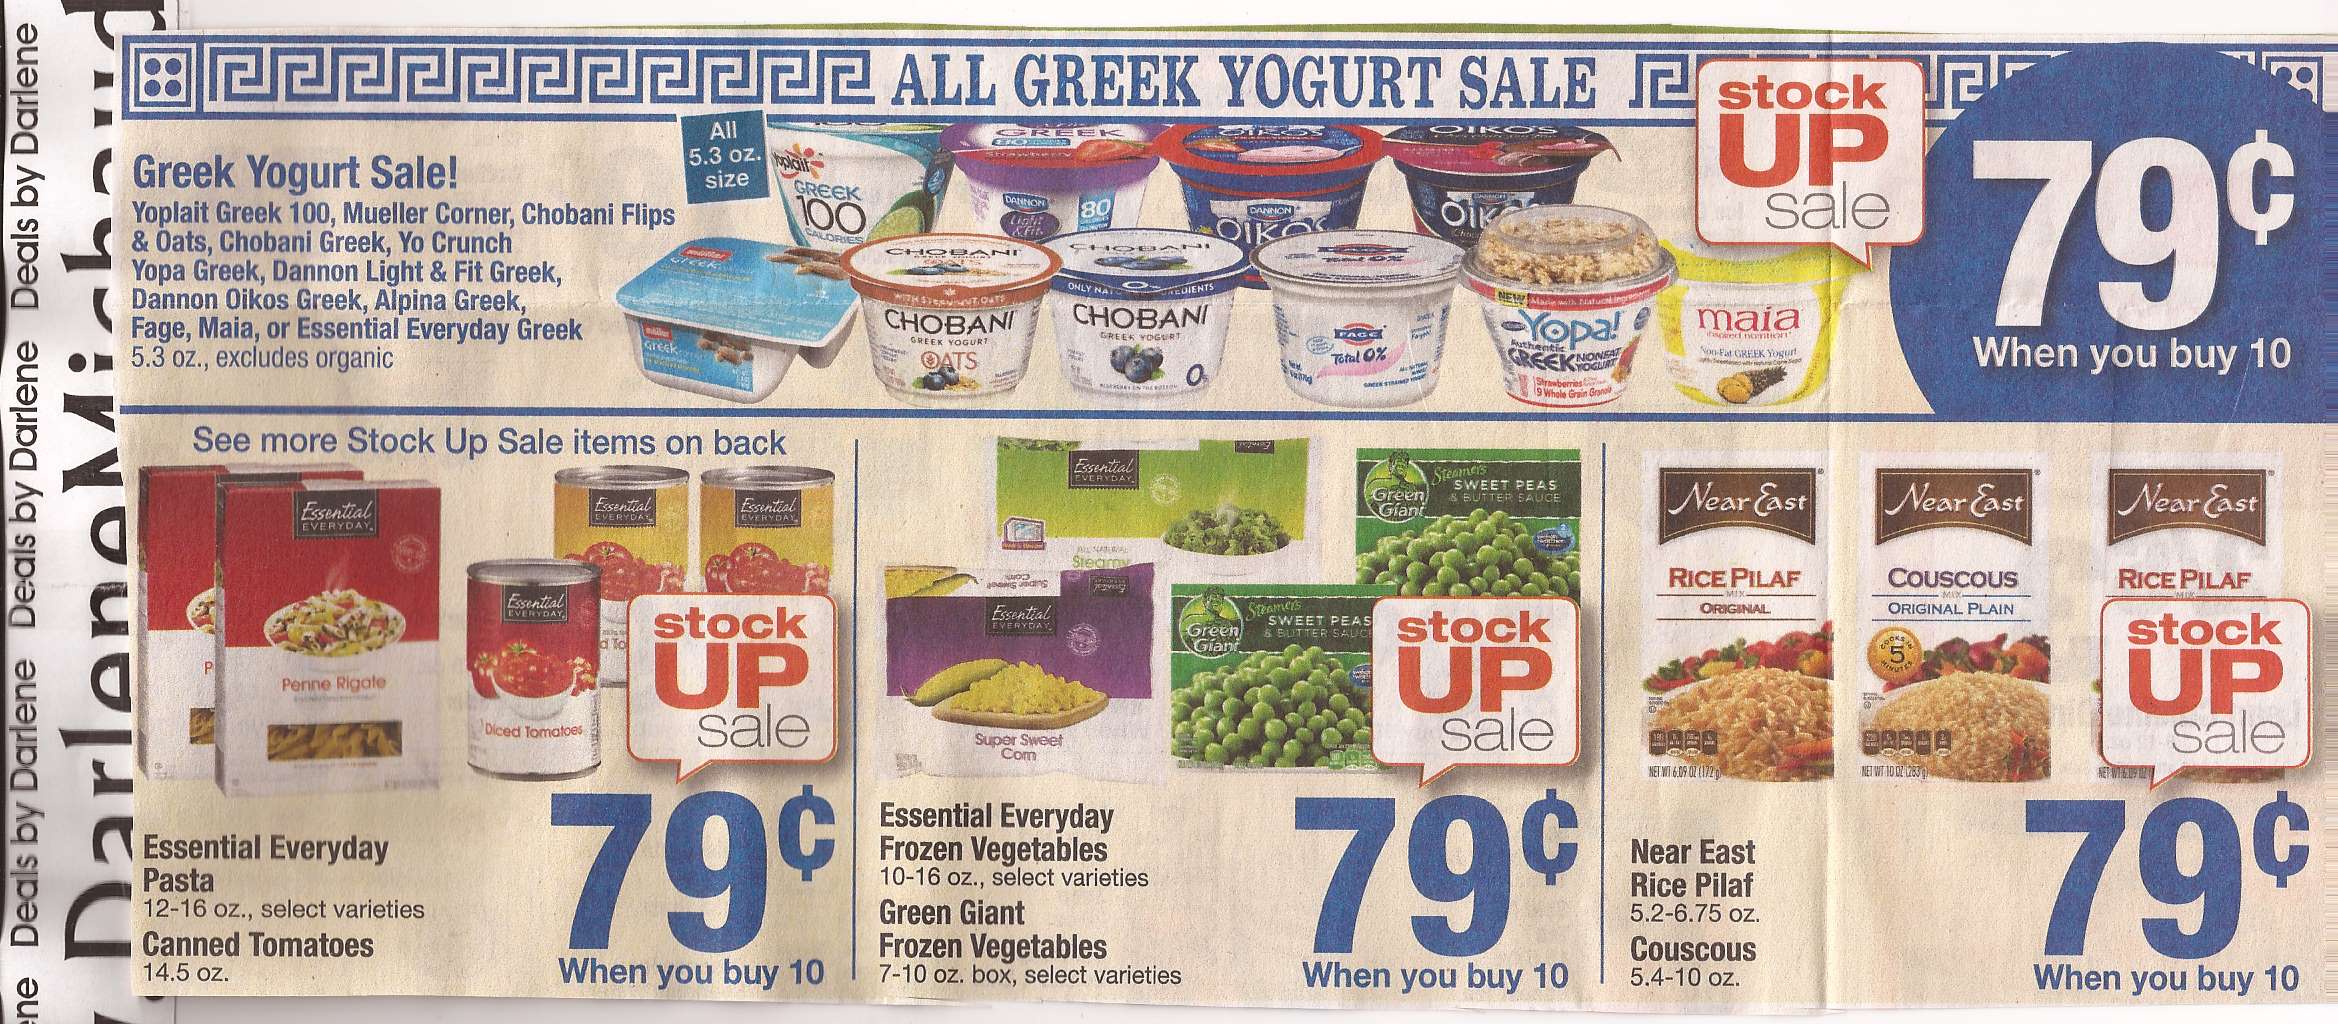 shaws-flyer-ad-scan-preview-january-2-january-8-page-1b